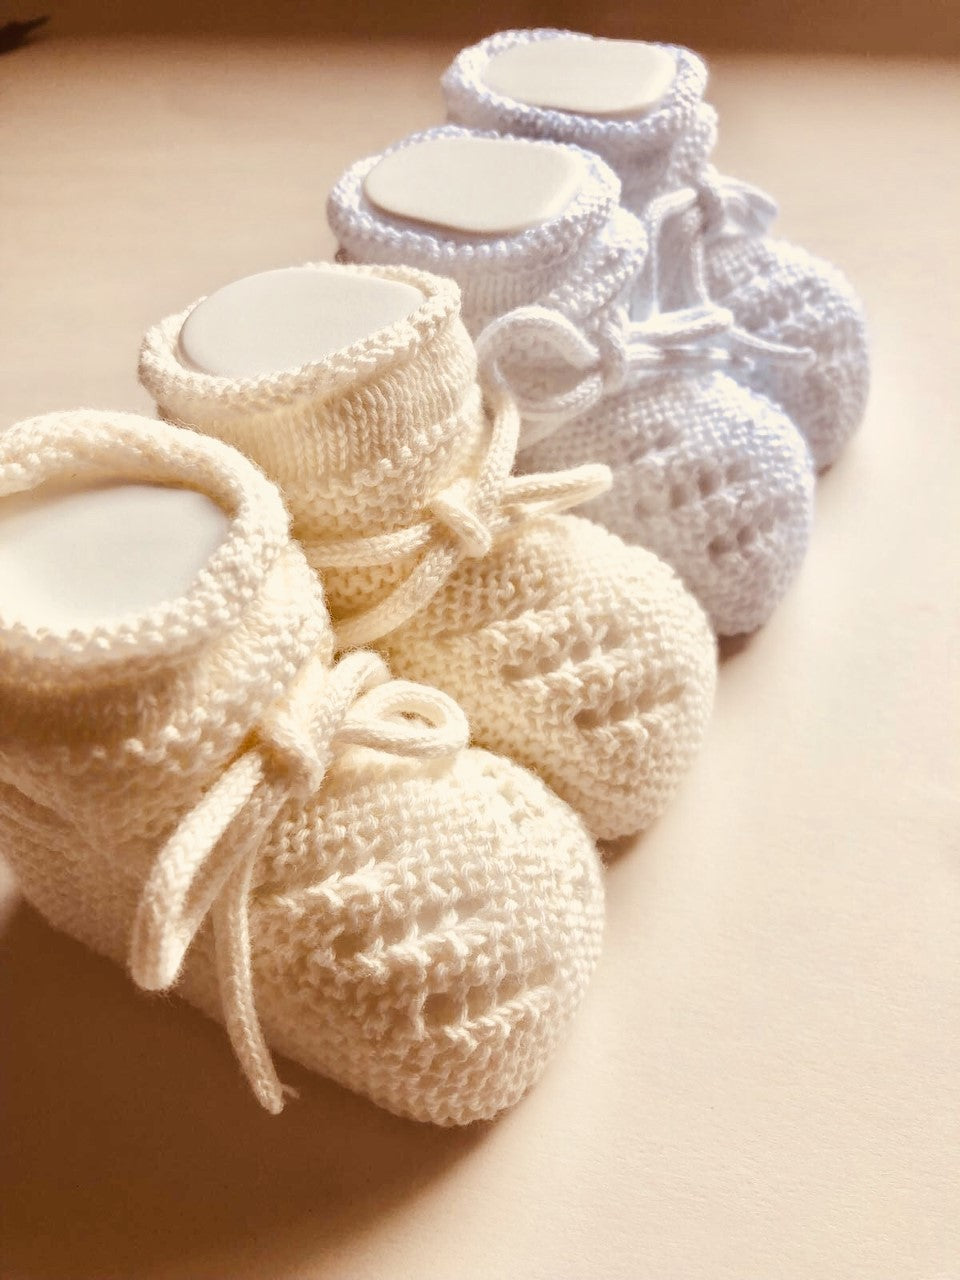 Adorable Unisex Knitted Baby Booties. Available in White and Ecru. Made in Spain with love. 